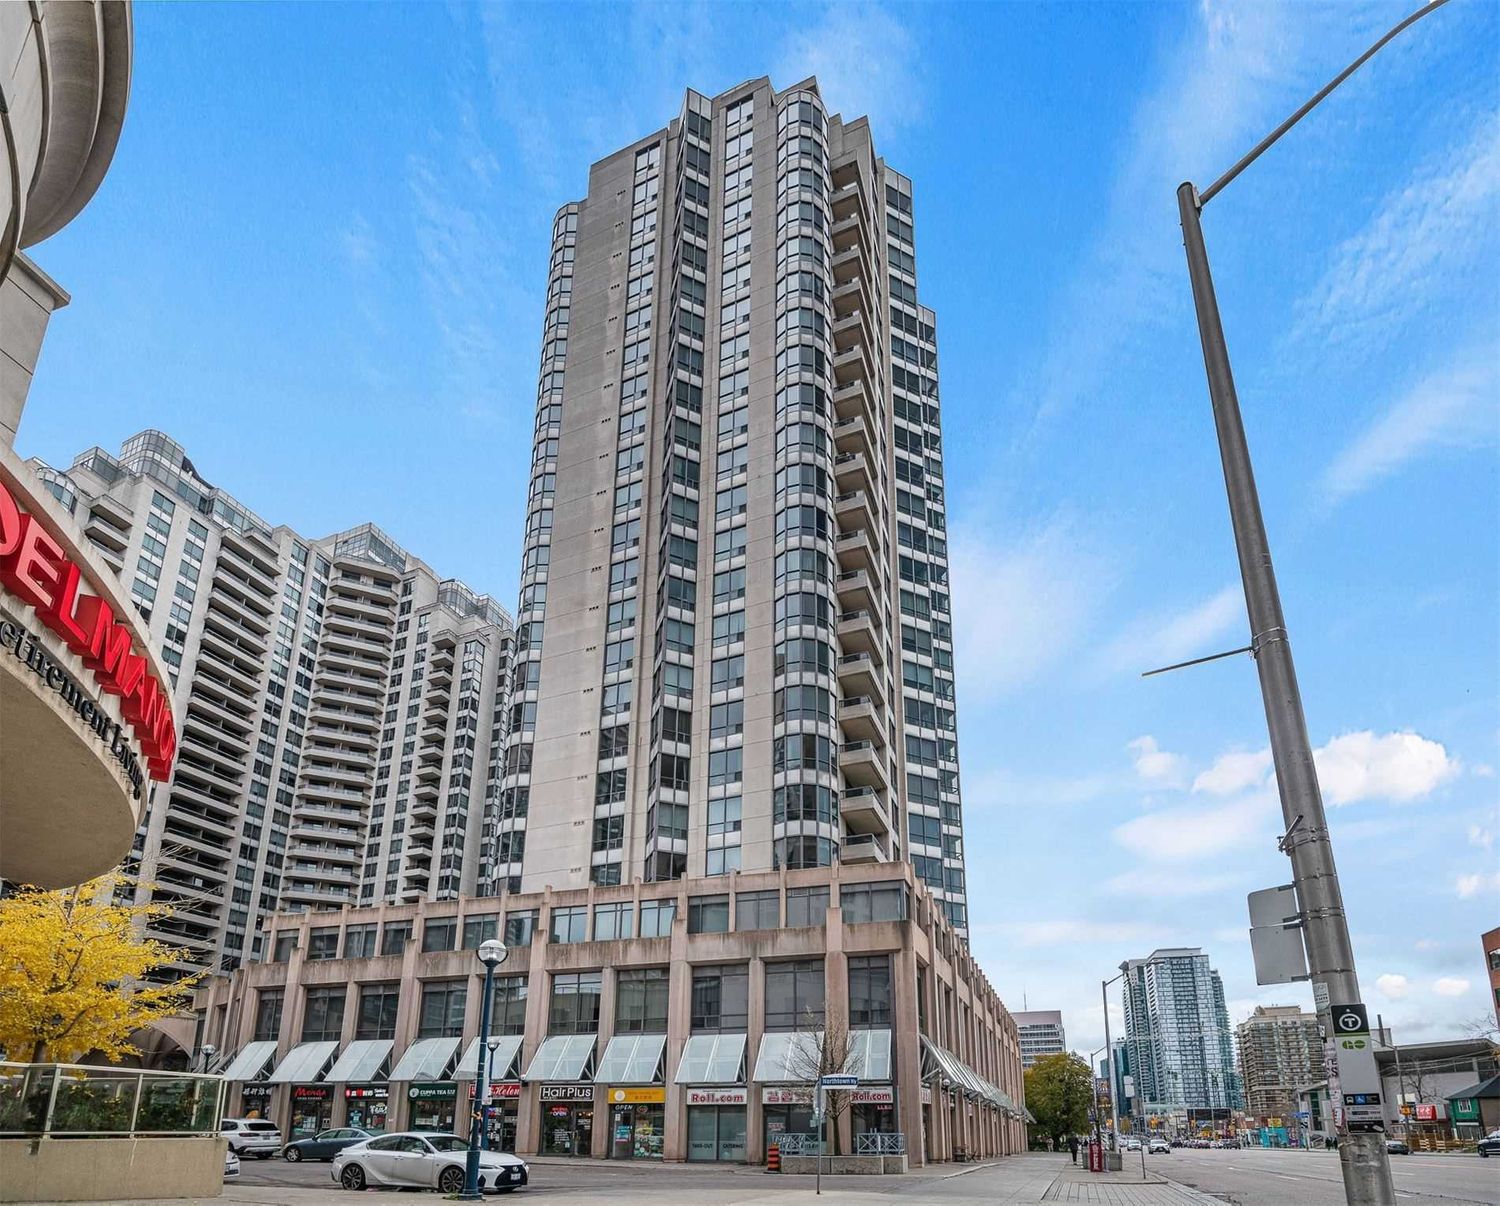 5 Northtown Way. Triomphe Condos is located in  North York, Toronto - image #3 of 3